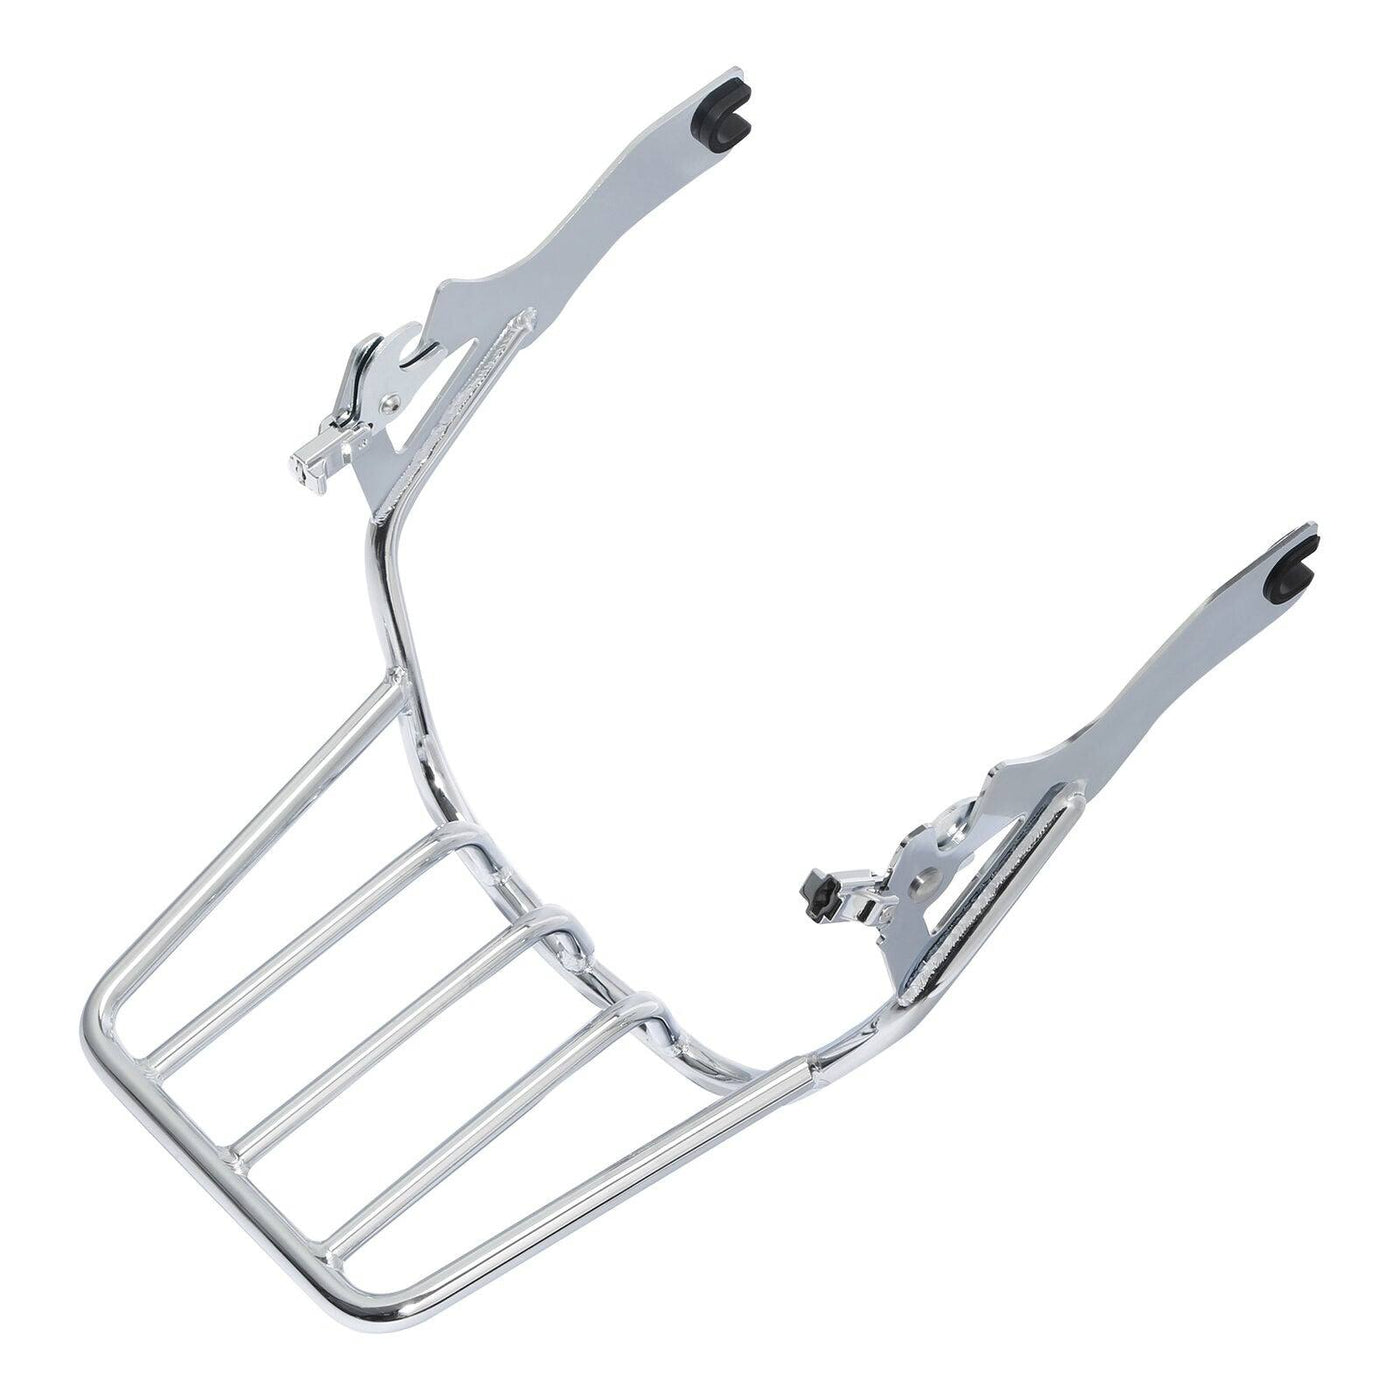 Two-Up Luggage Mount Rack Fit For Harley Softail Fat Bob FXFB 18-19 FXFBS 18-21 - Moto Life Products